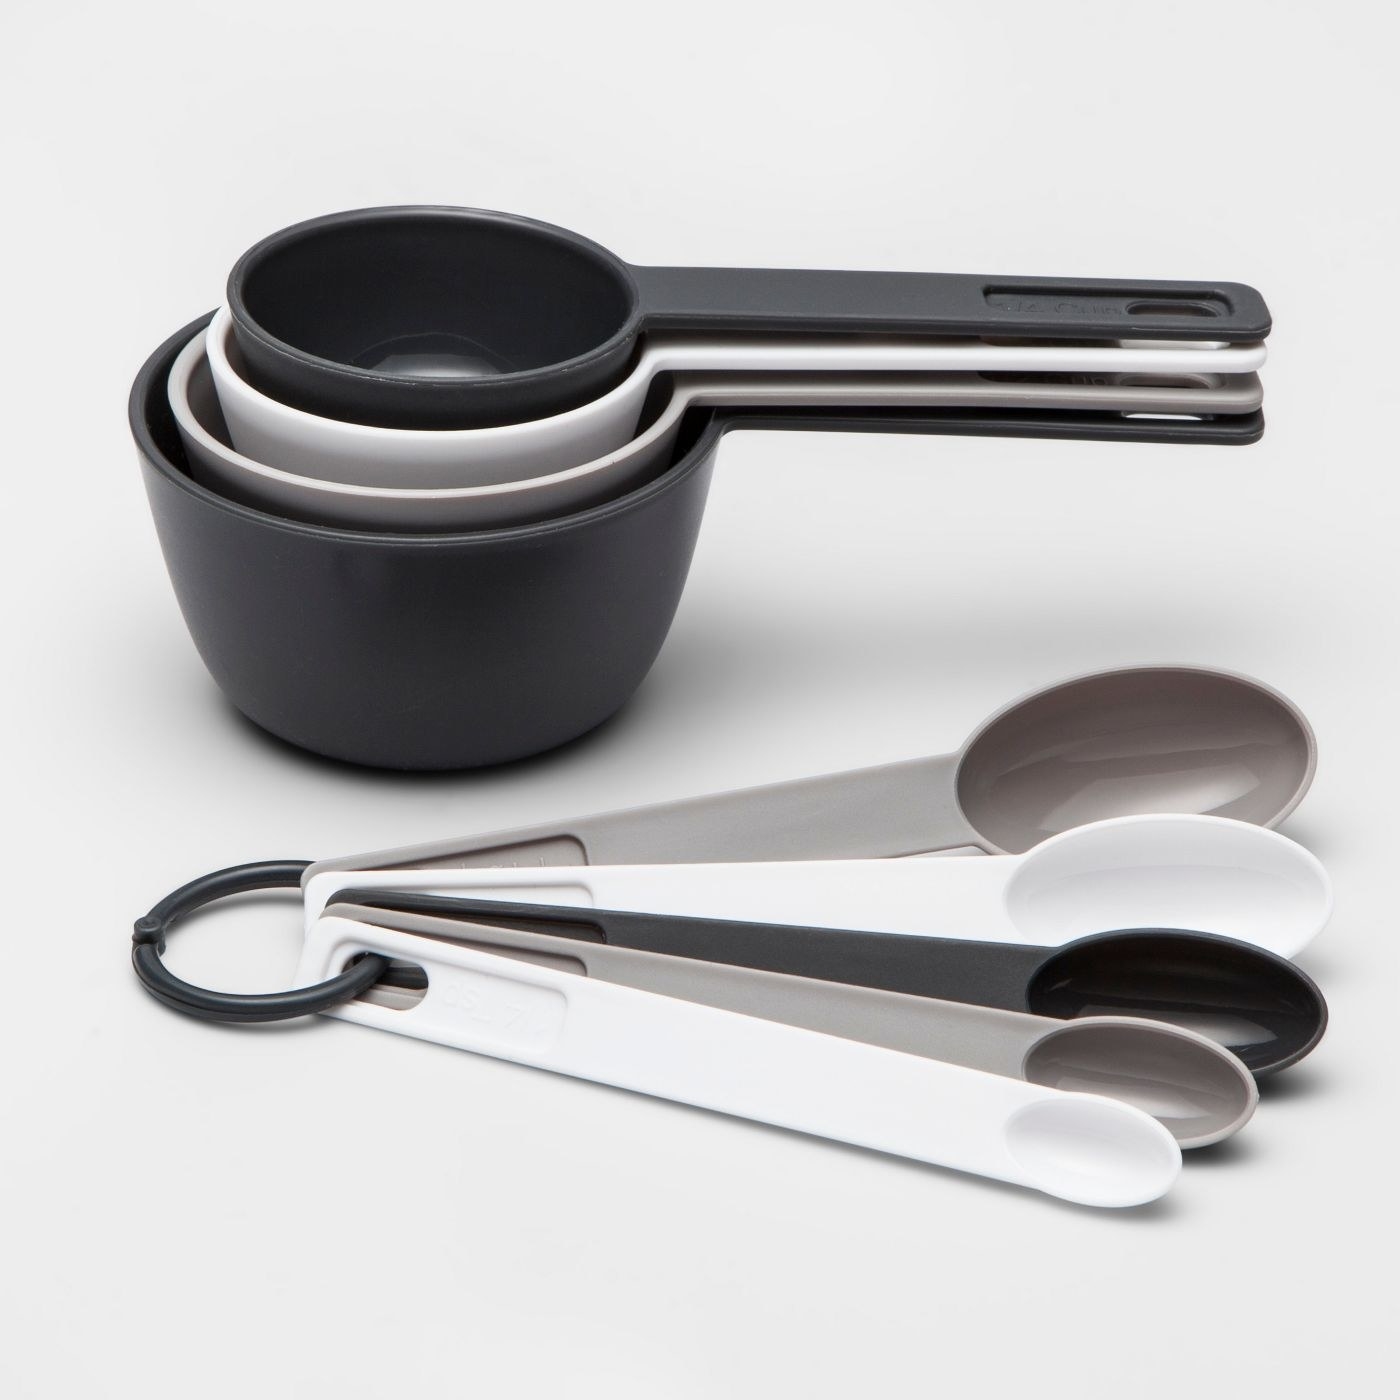 The measuring cup and spoons set